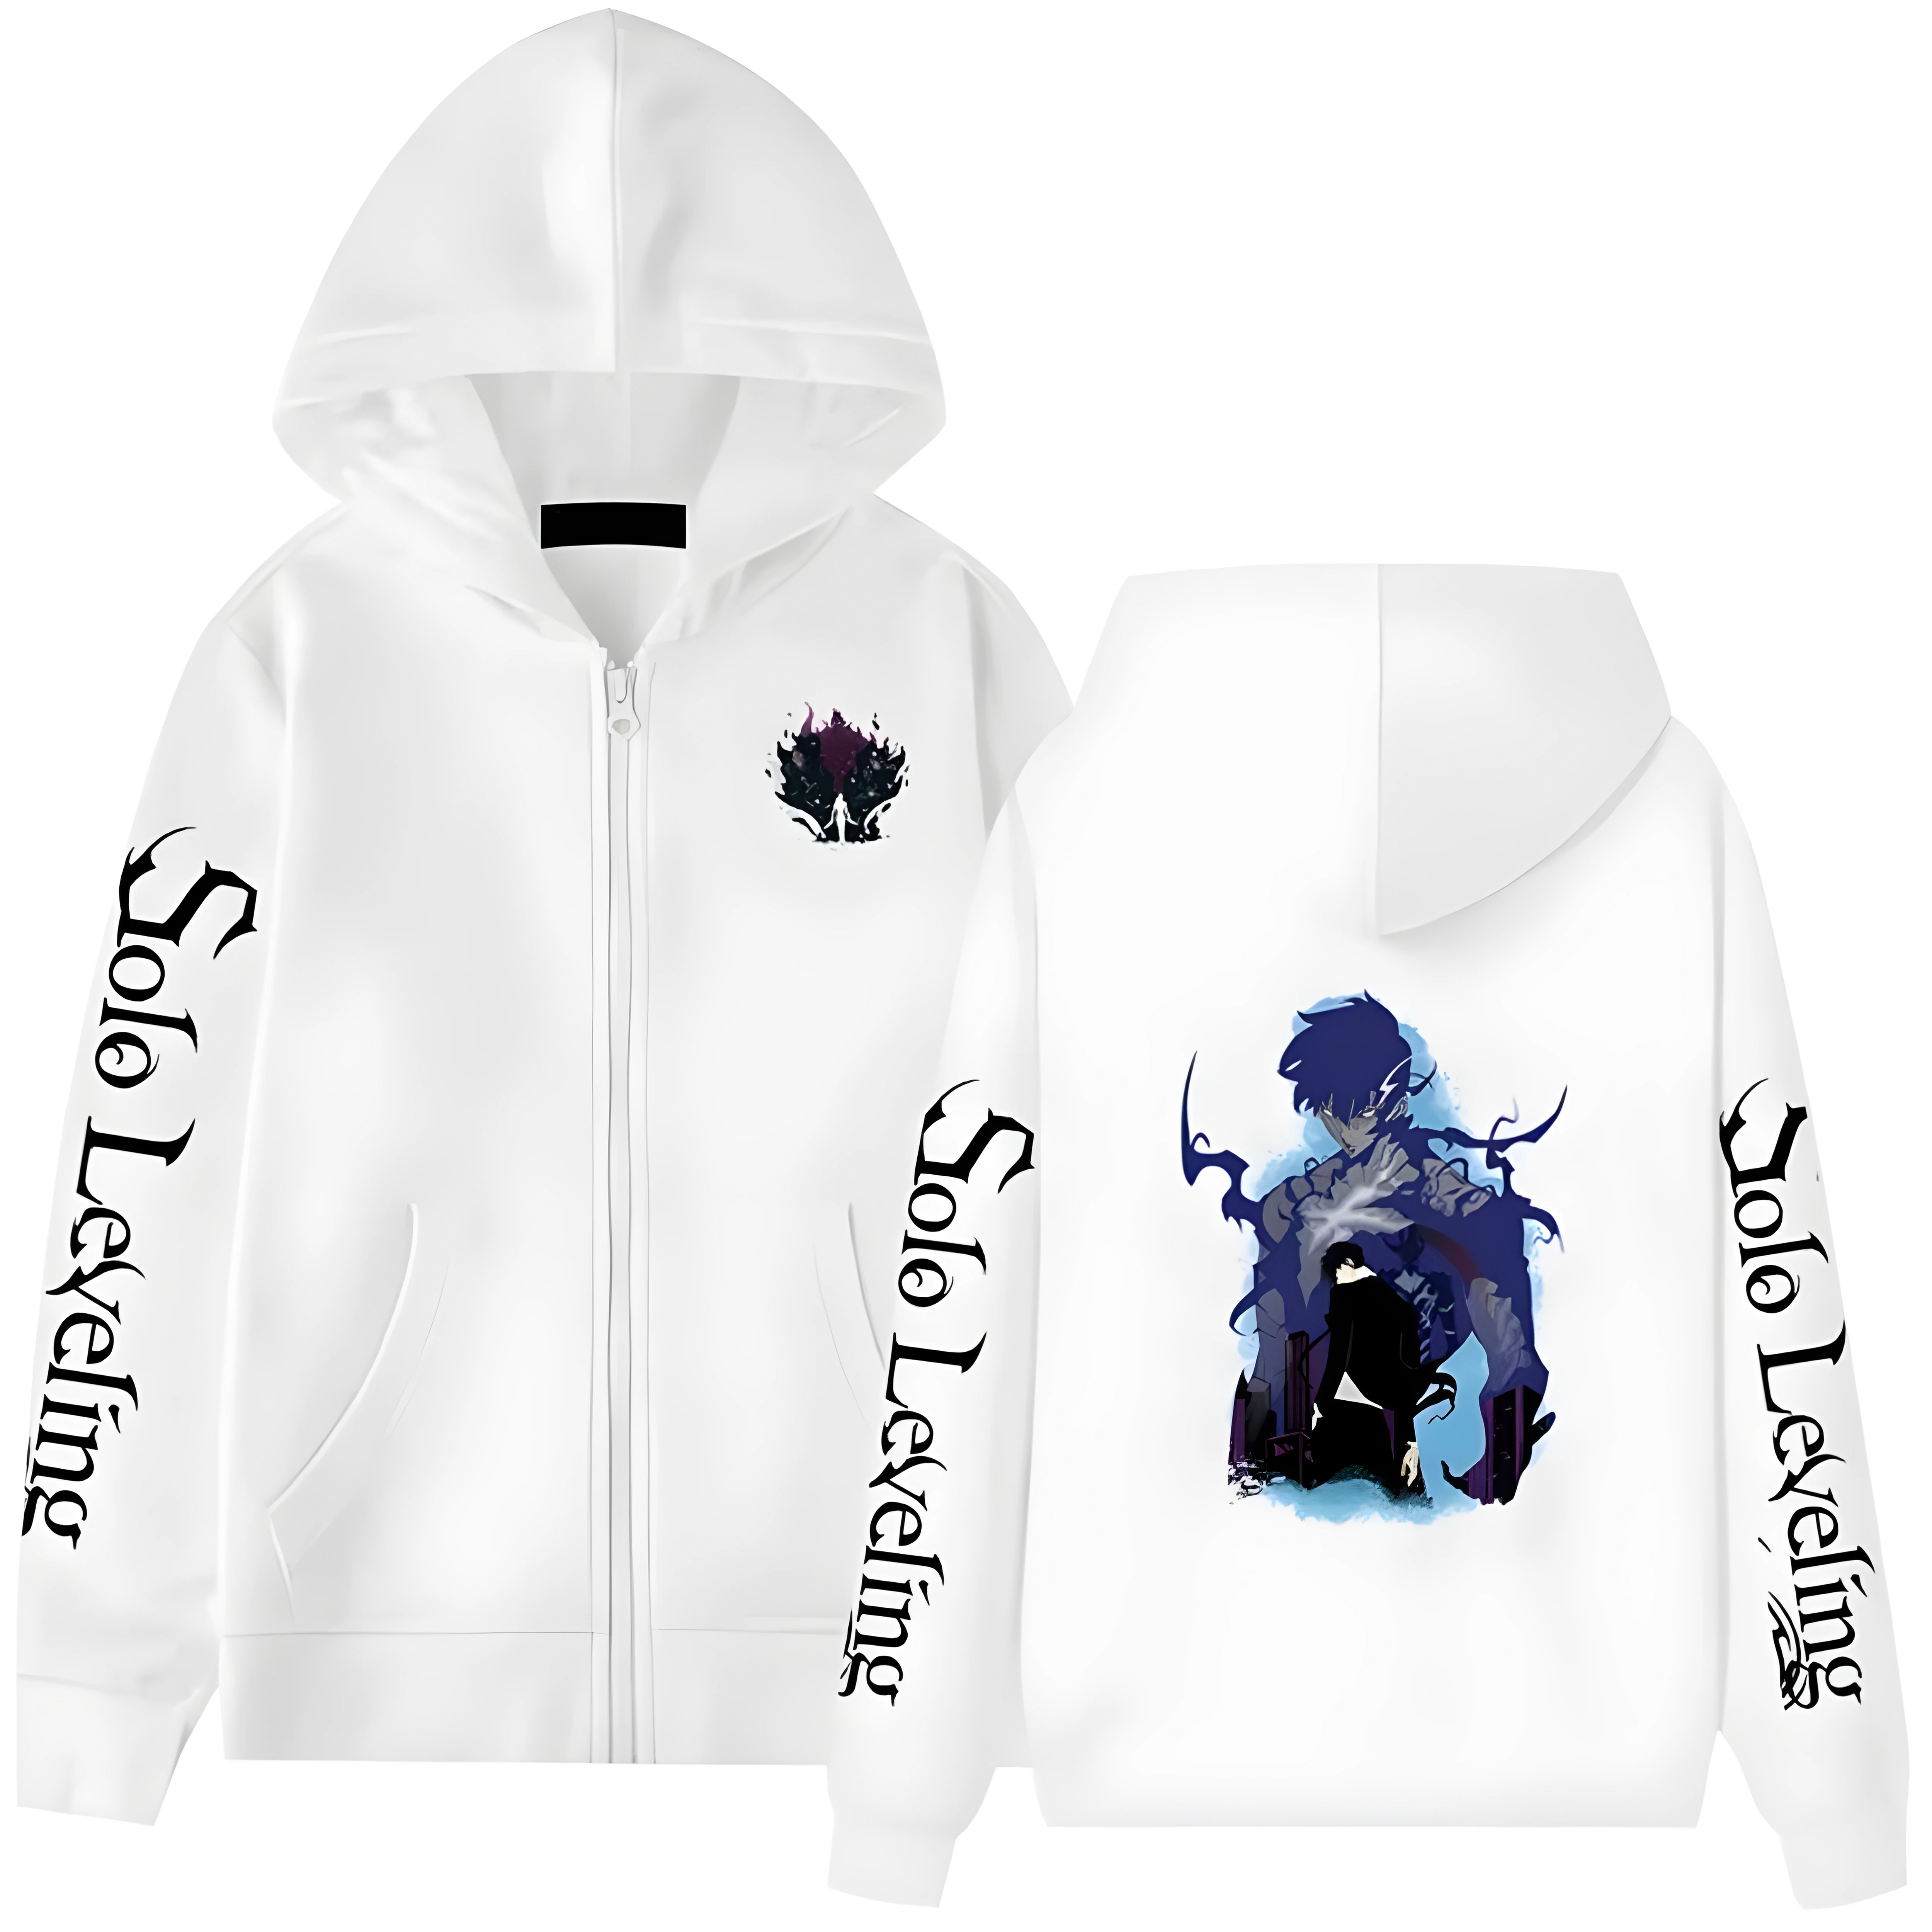 1 1 - Solo Leveling Merch Store